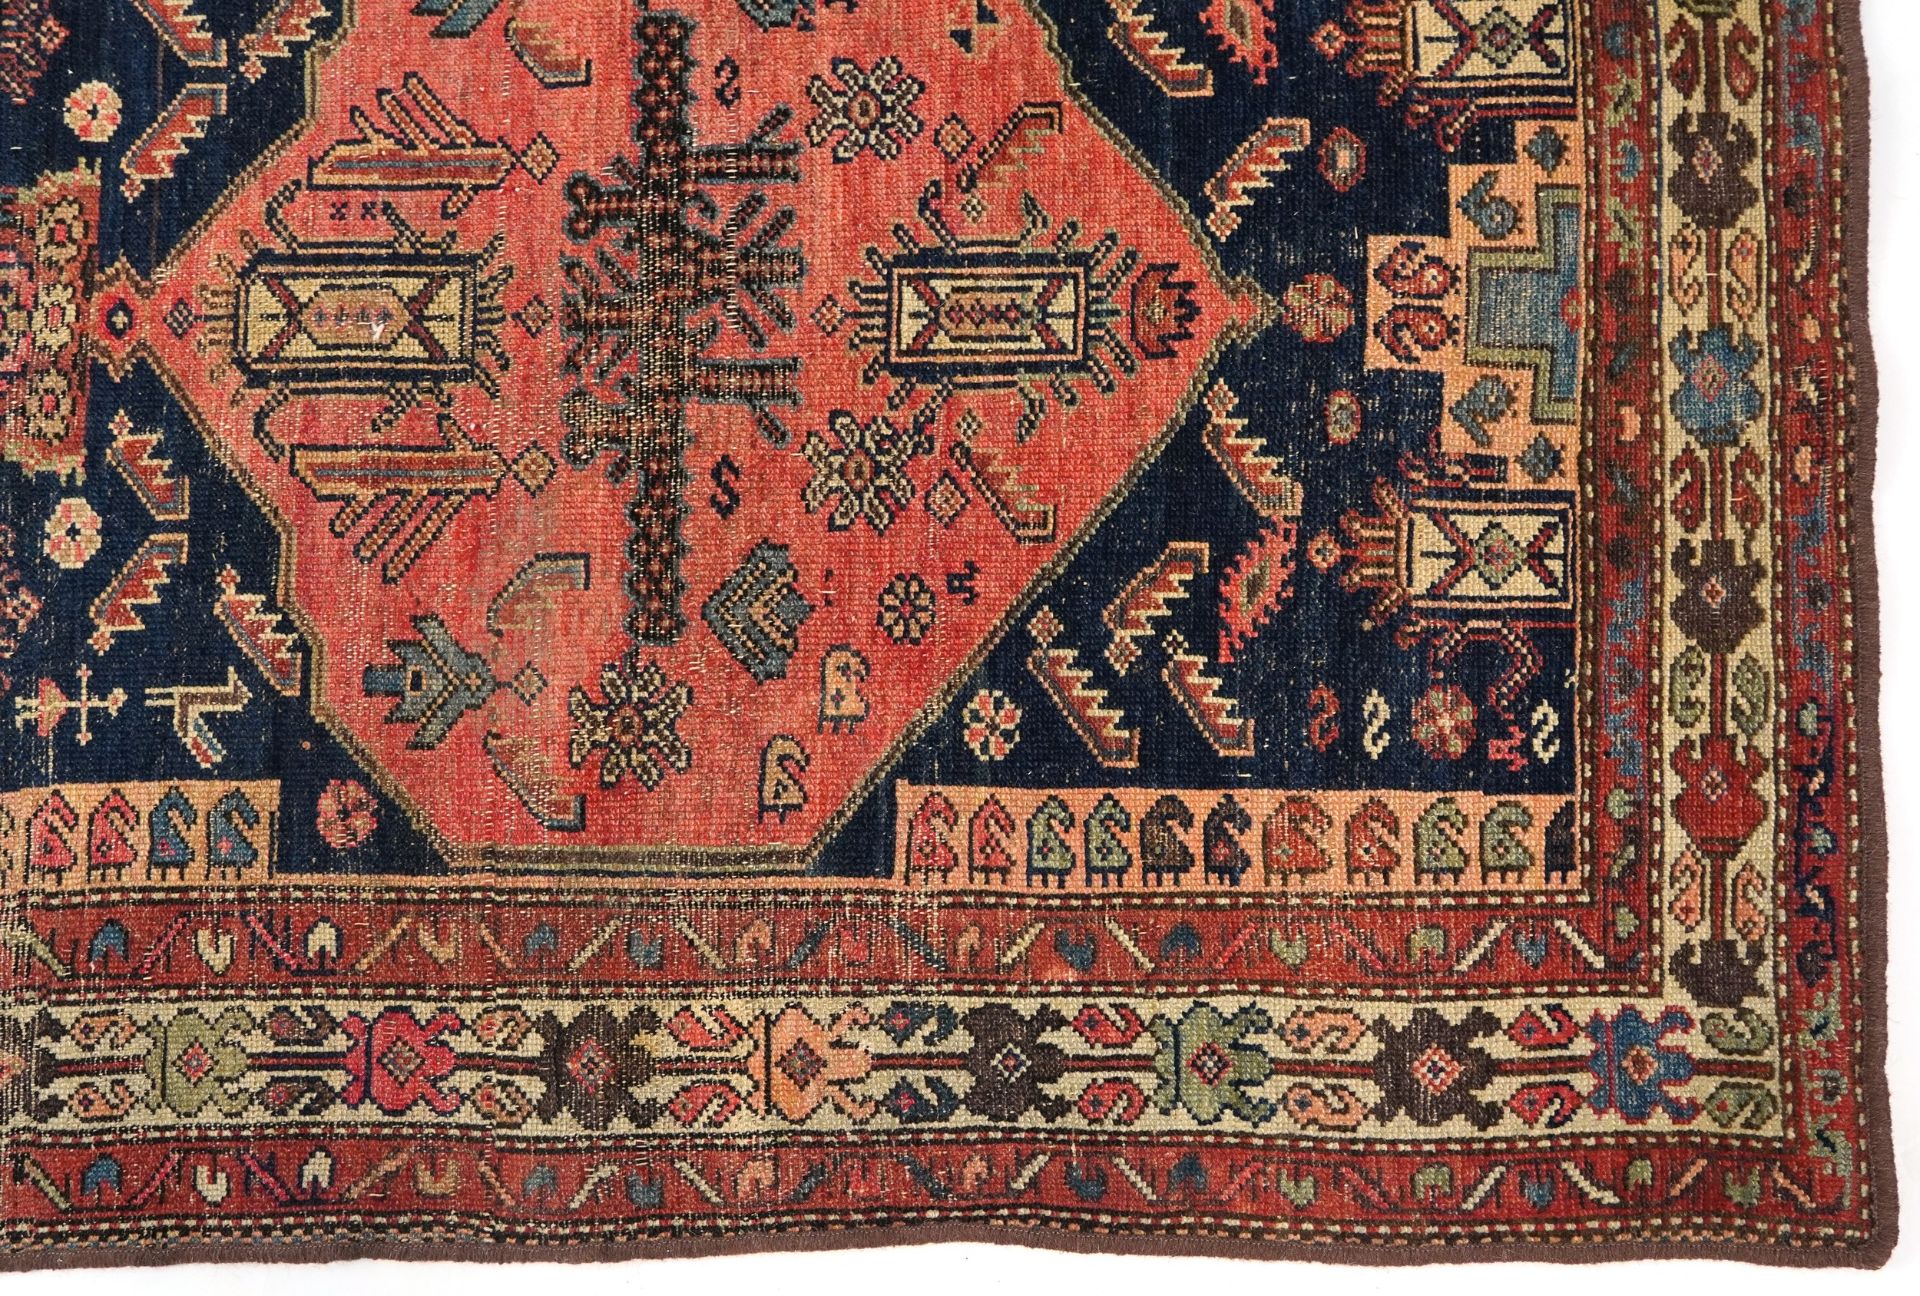 Rectangular Afghan red and blue ground rug with all over geometric and animal design, 177cm x 120cm - Image 5 of 6